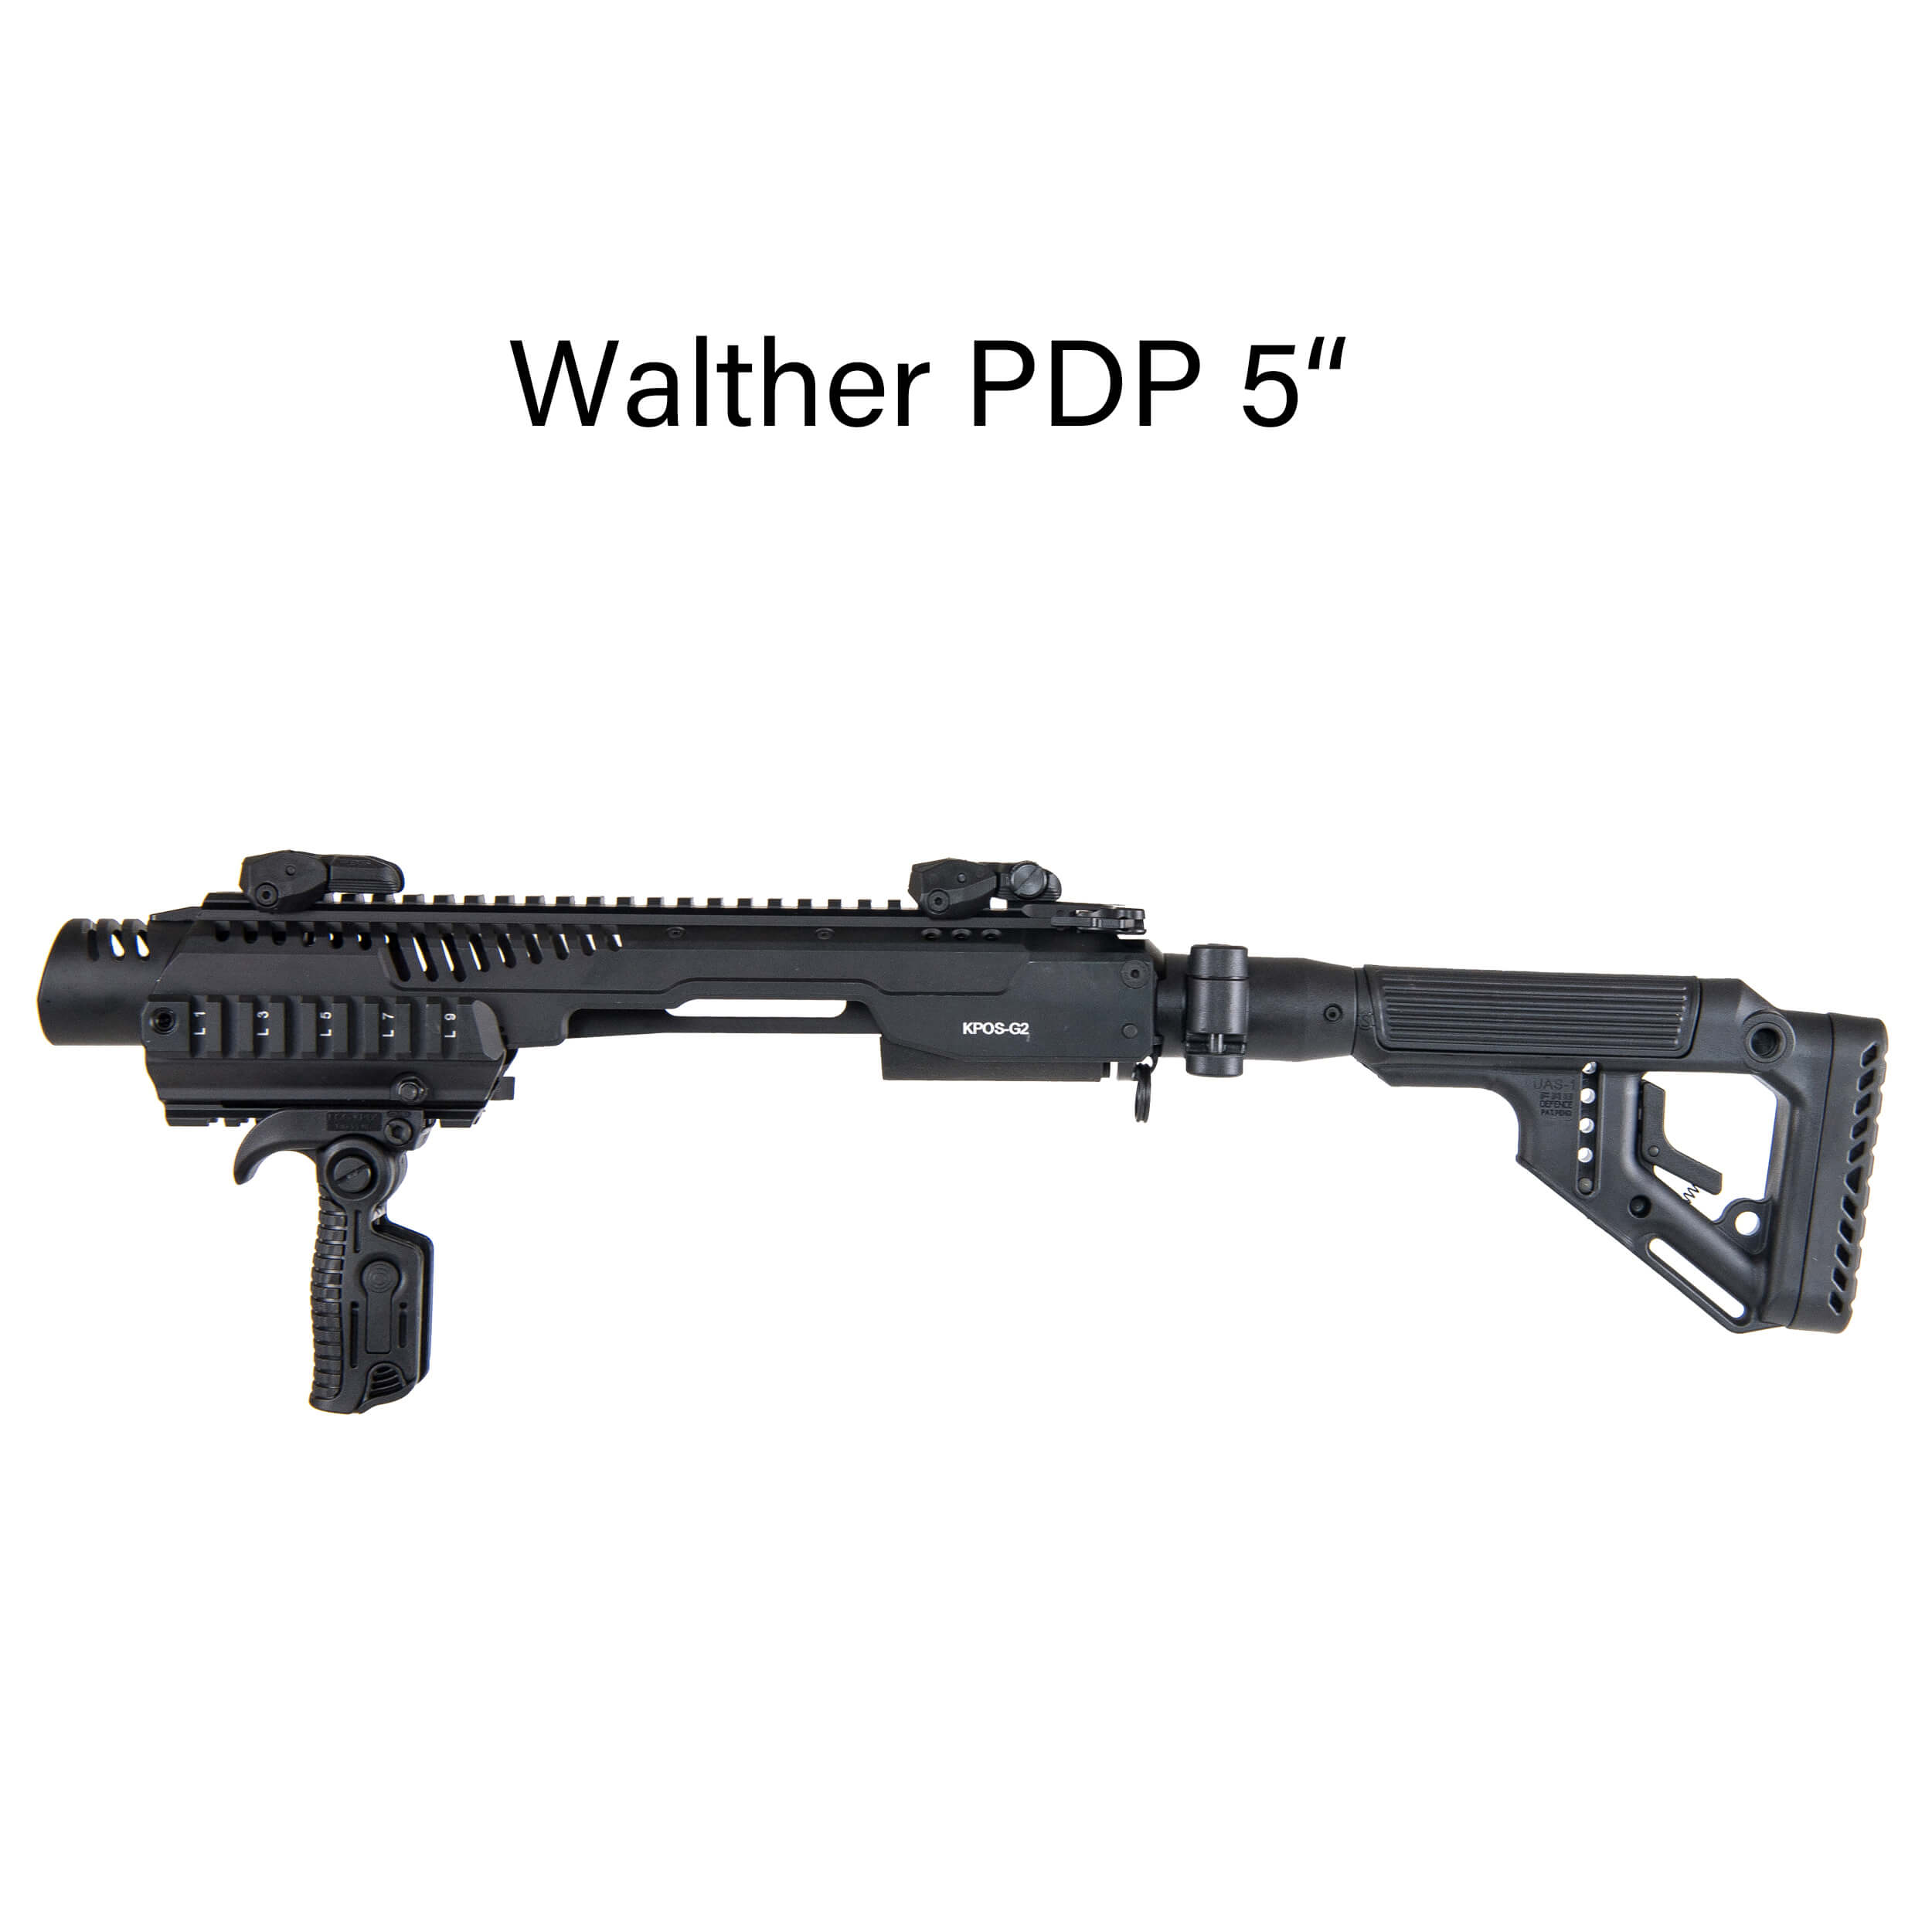 KPOS G2D Walther PDP 5"